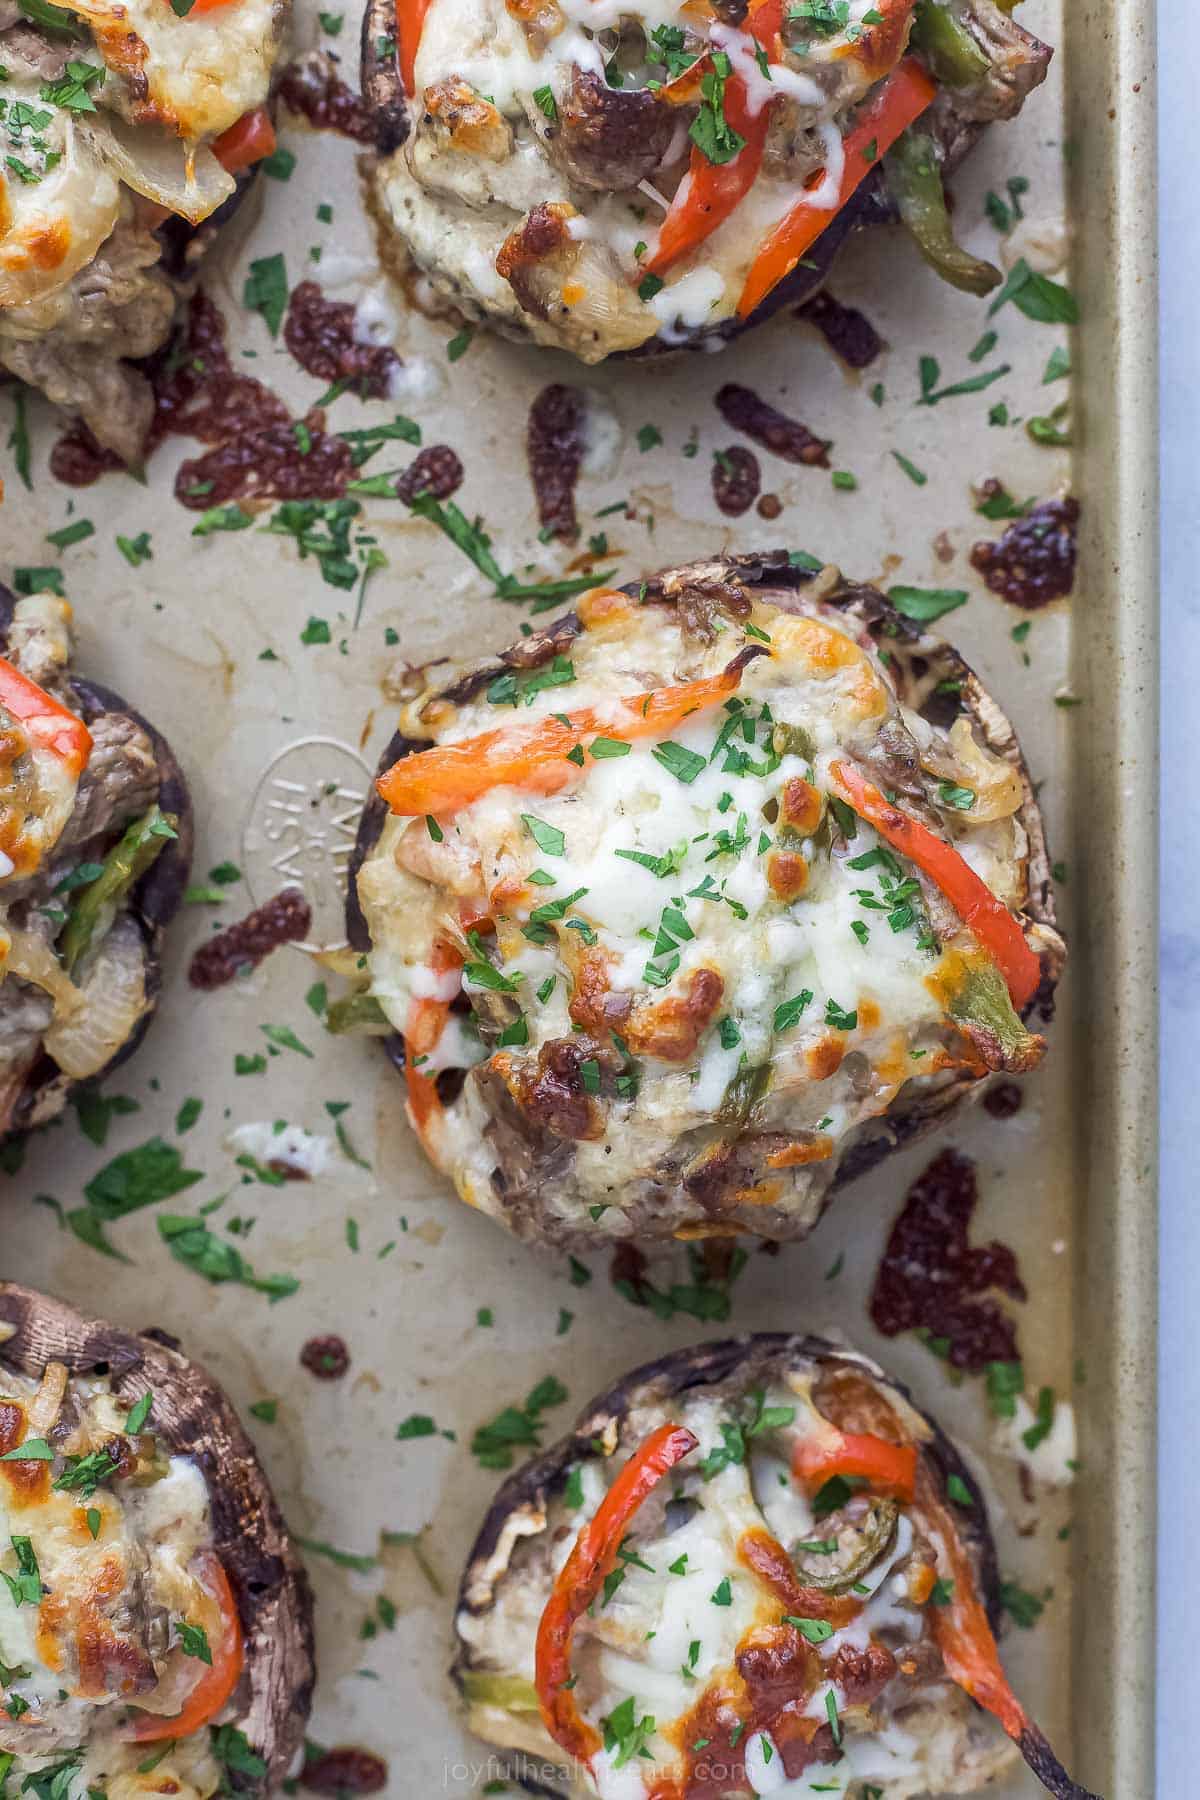 philly cheesesteak stuffed mushrooms on a sheet tray garnished with fresh herbs